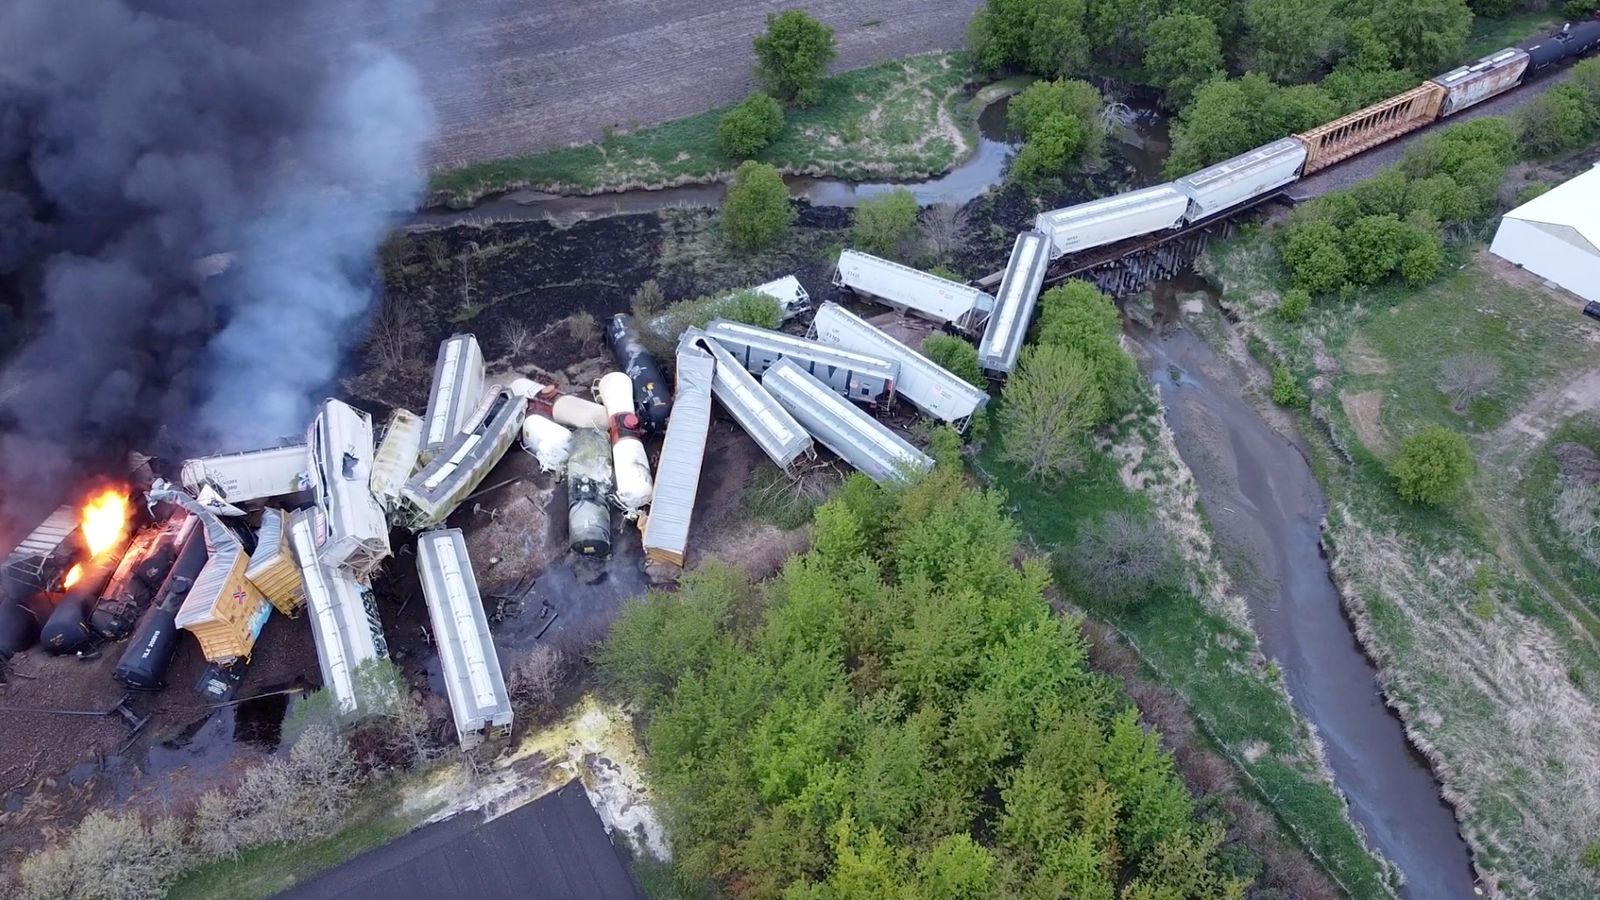 Freight train carrying hazardous substances derails and catches fire in